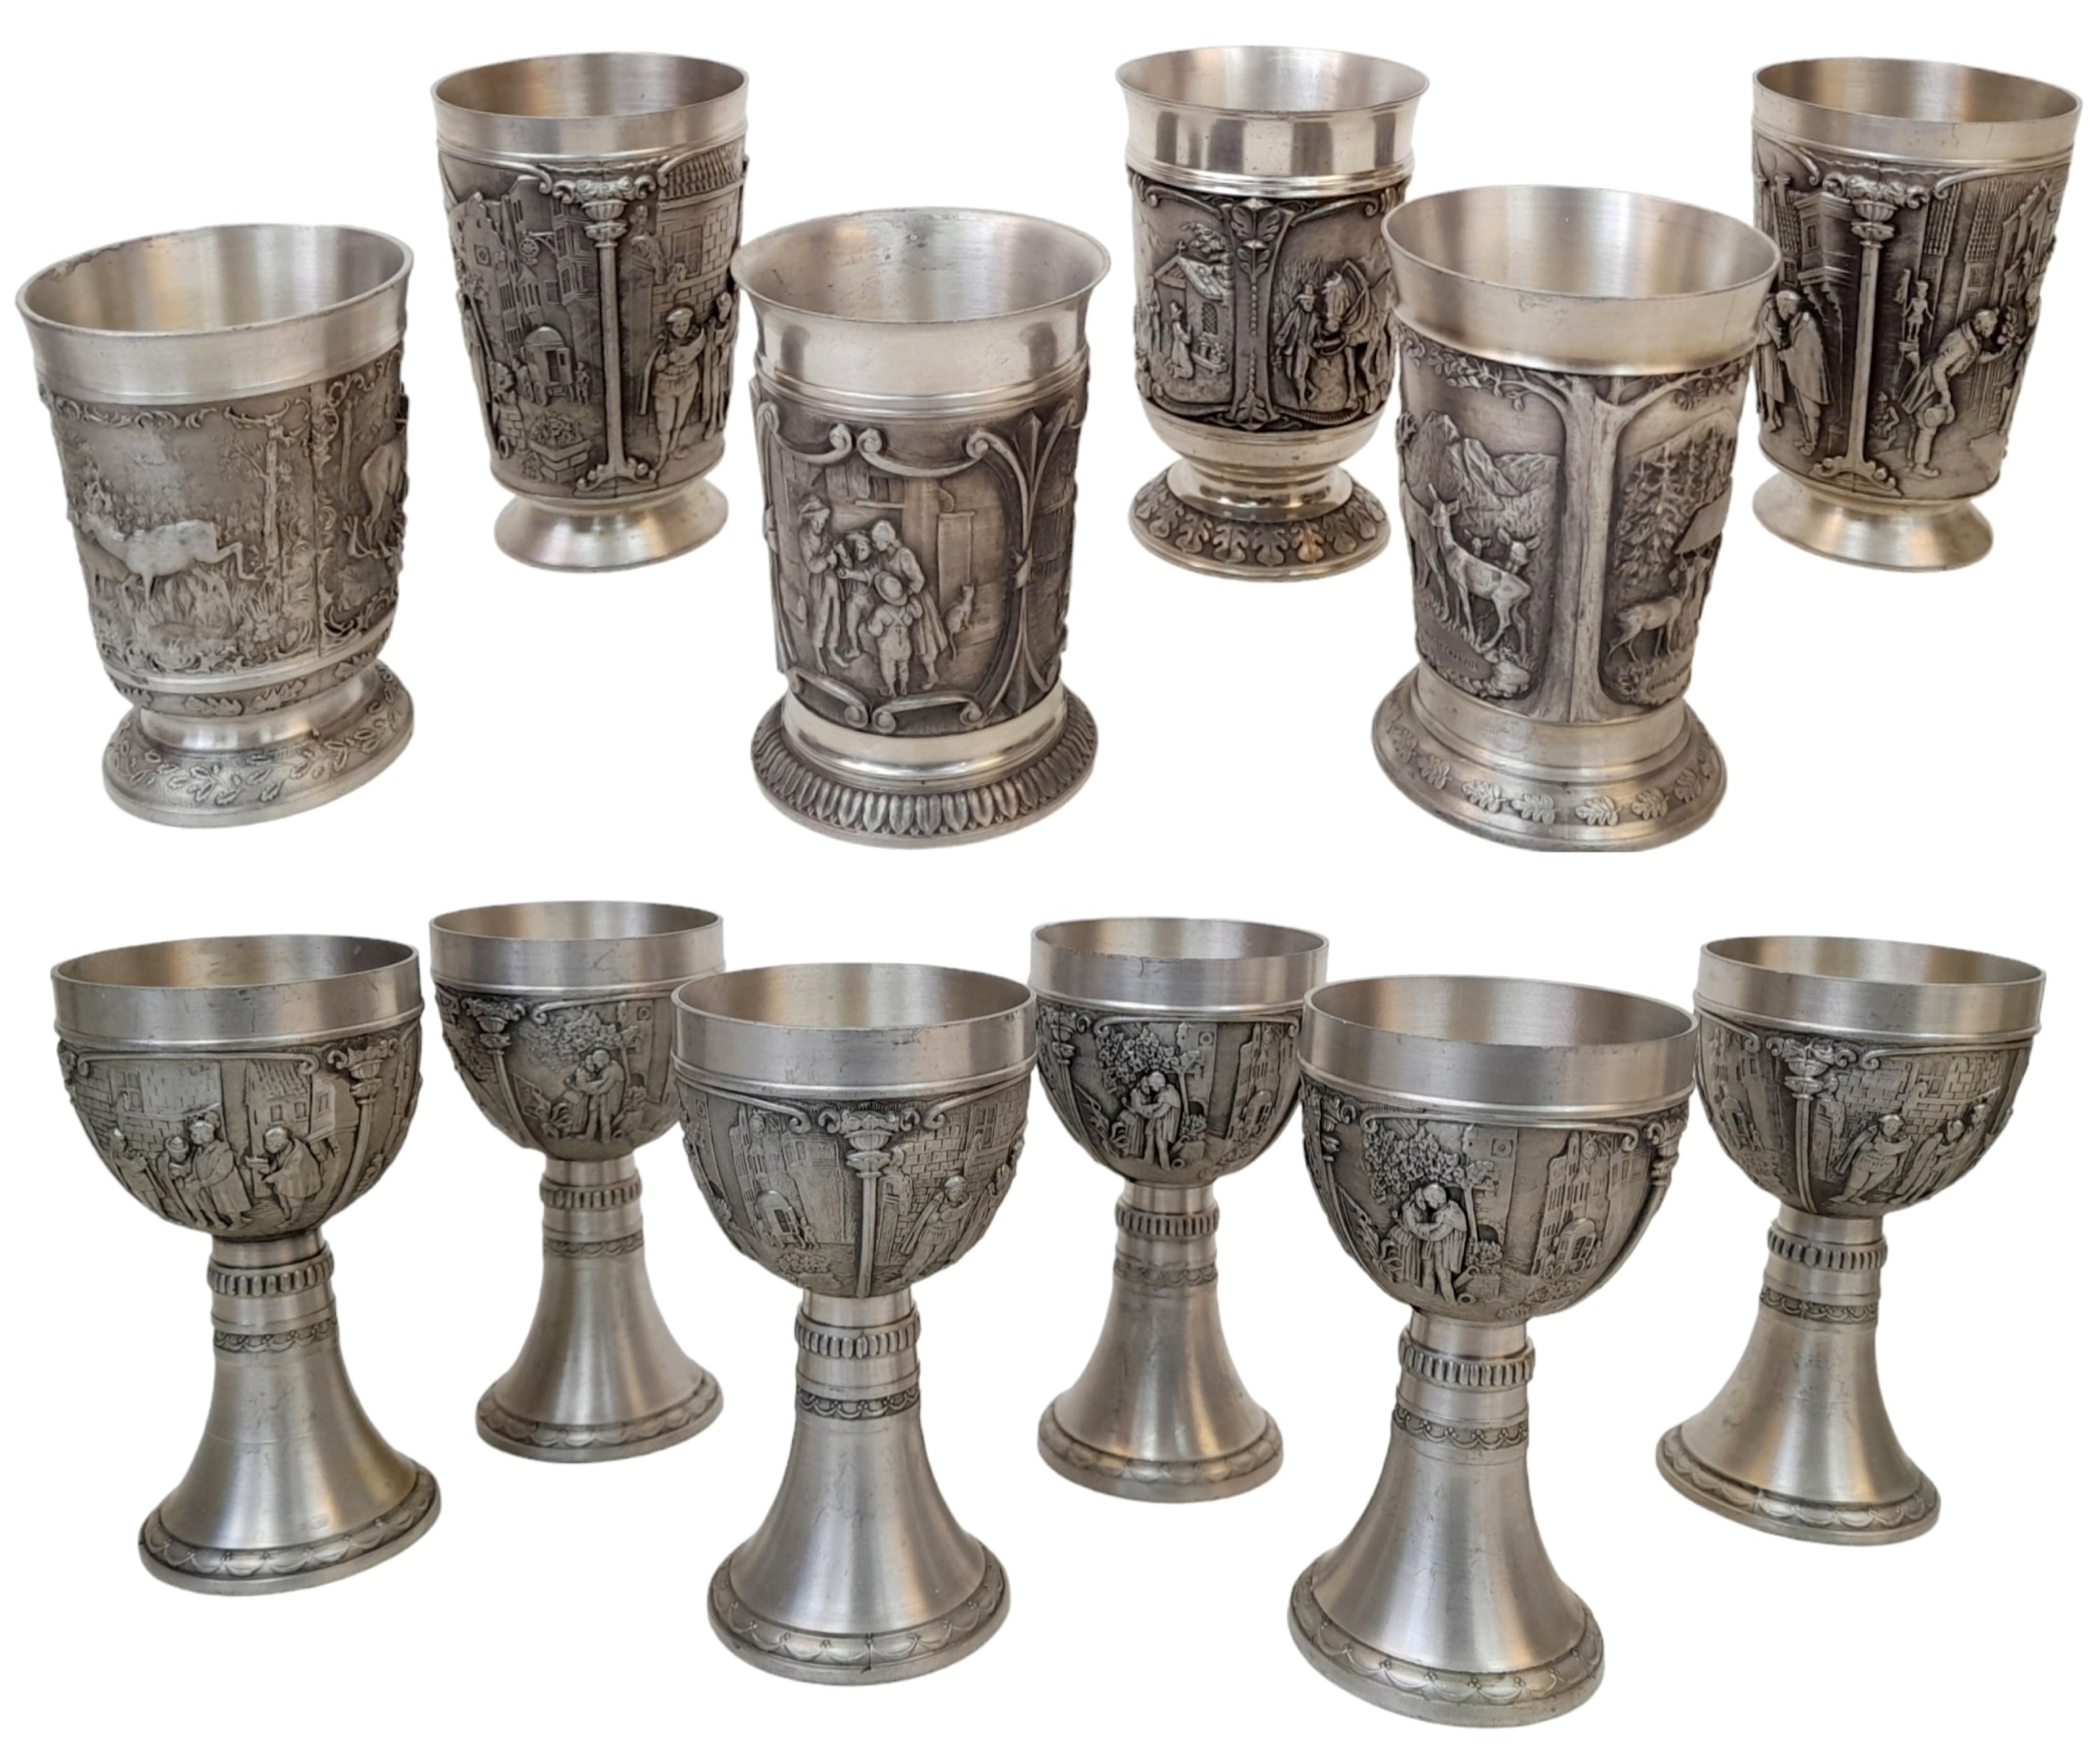 Two Sets (12 total) of German Zinn Ornate Pewter Cups. Six goblets and six slightly different